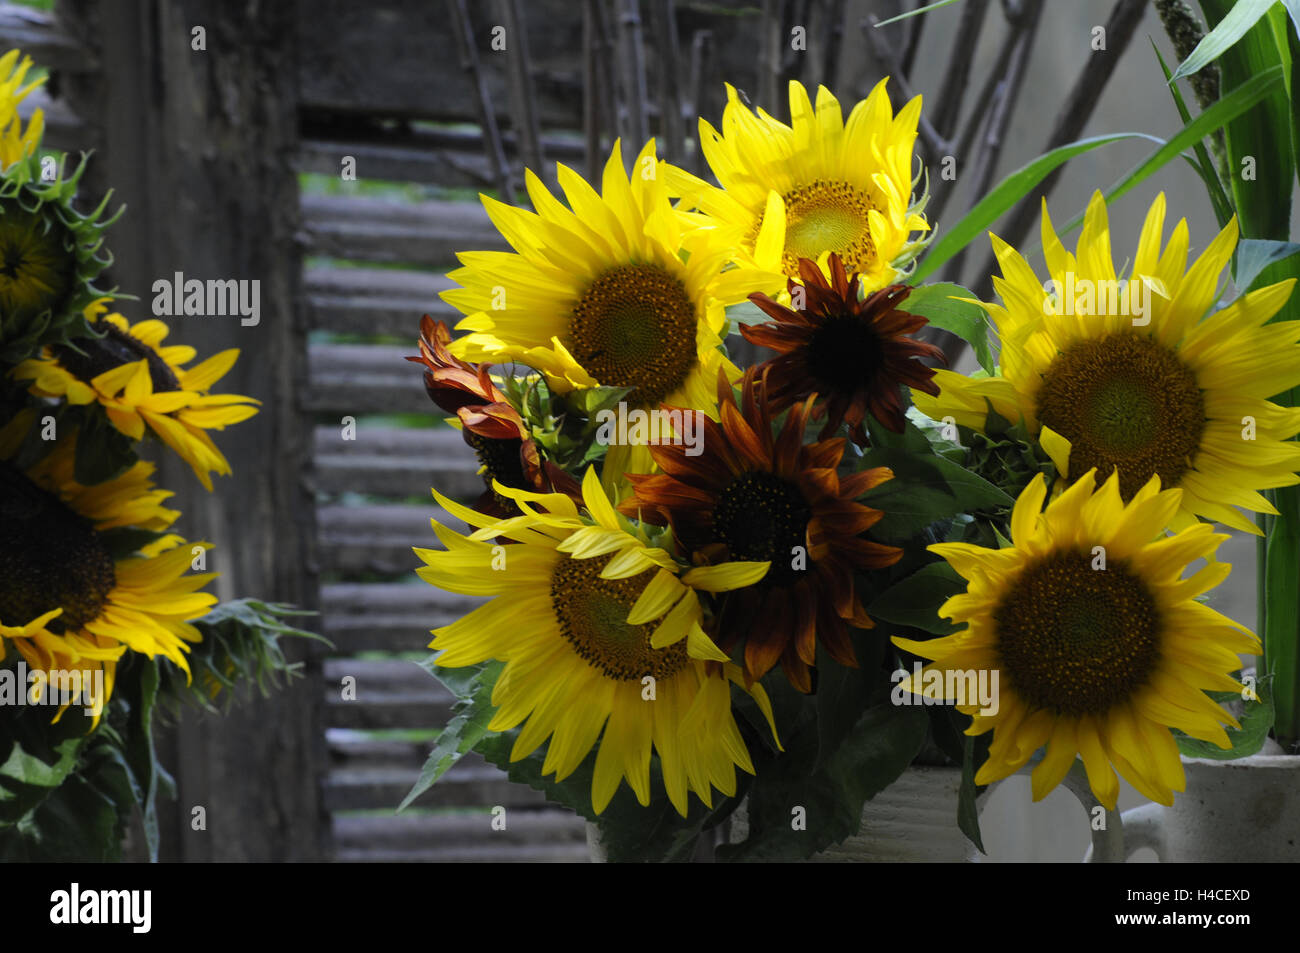 Sunflower arrangement in country style Stock Photo